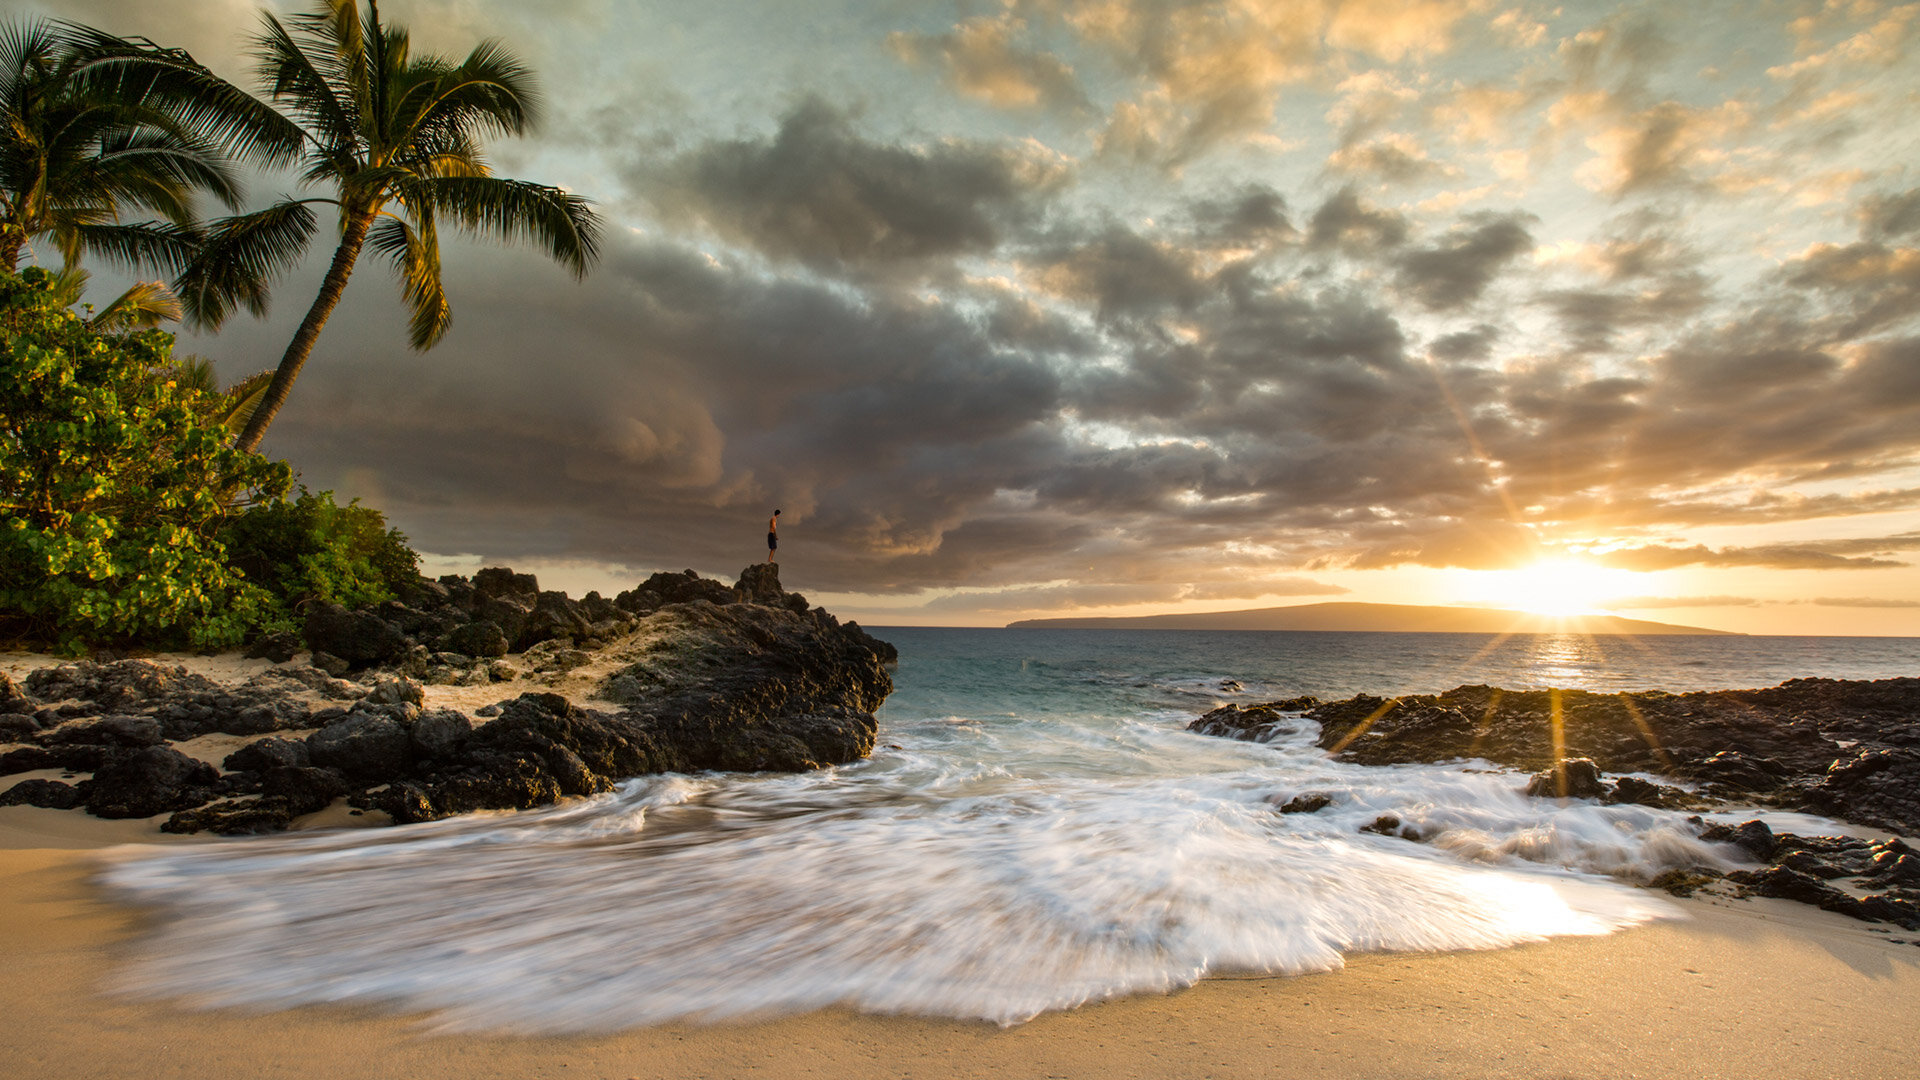 Top 5 Best Beaches To Watch A Sunset On Maui Hawaii Photography Tours